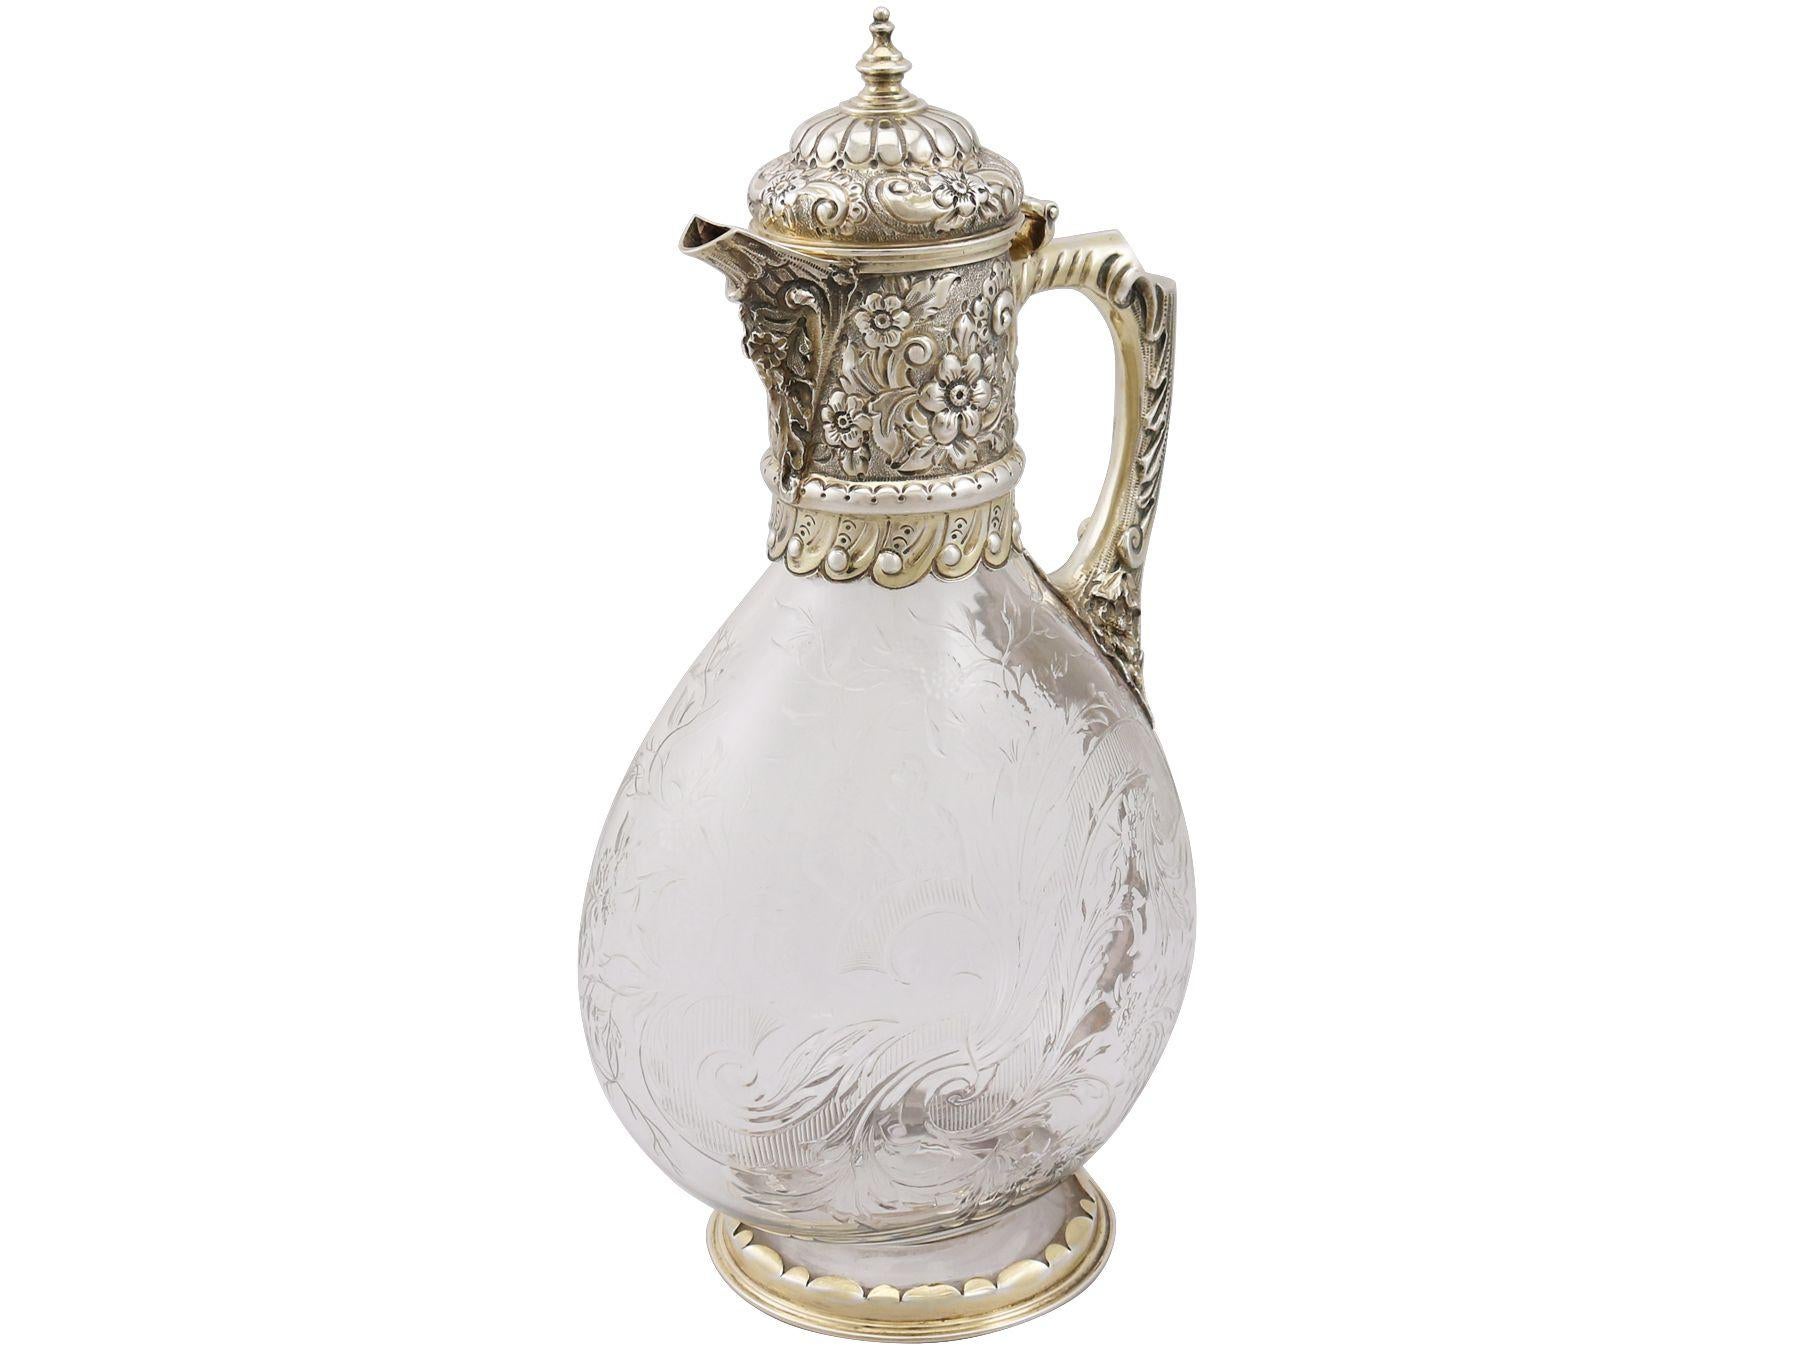 English Glass and Sterling Silver Gilt Mounted Claret Jug, Antique Victorian, '1890'